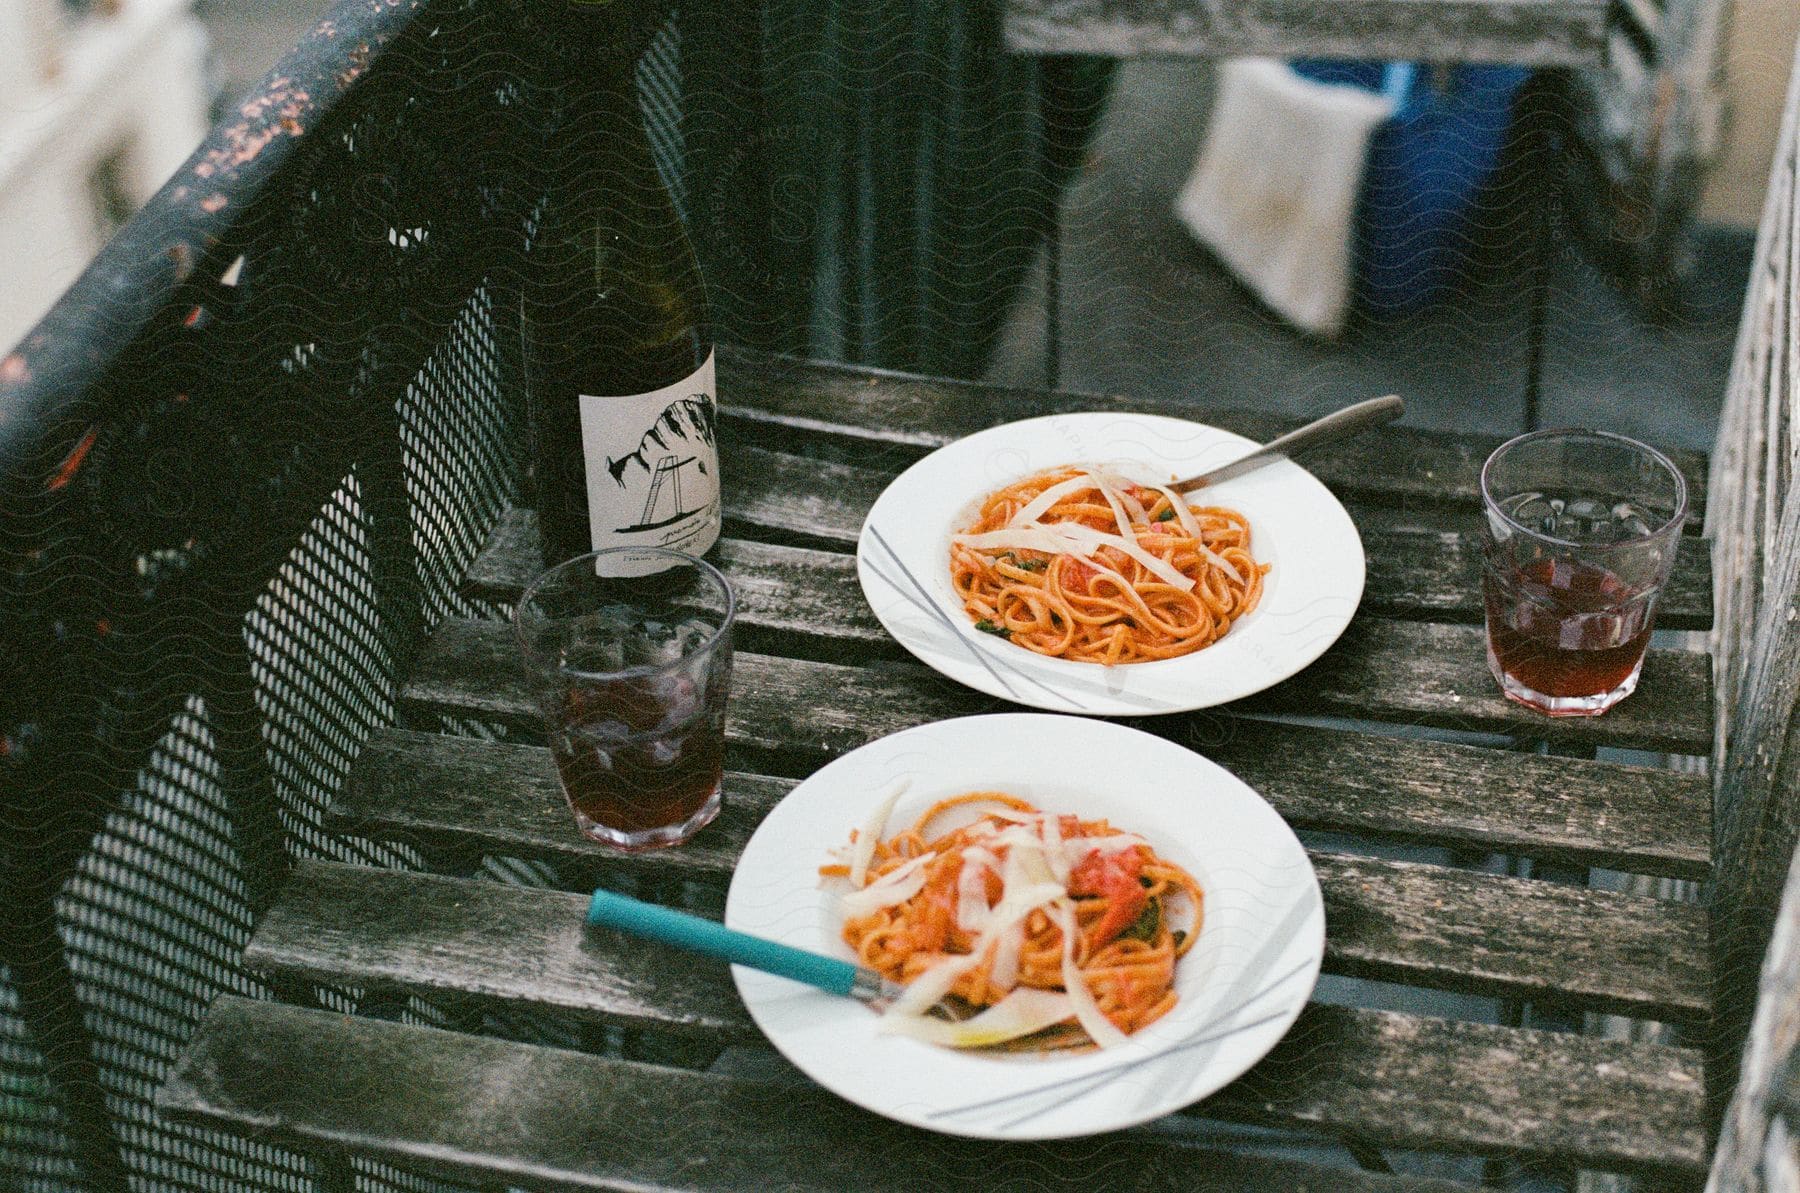 An al fresco meal with two portions of spaghetti, a bottle of wine and two glasses on a rustic wooden table.